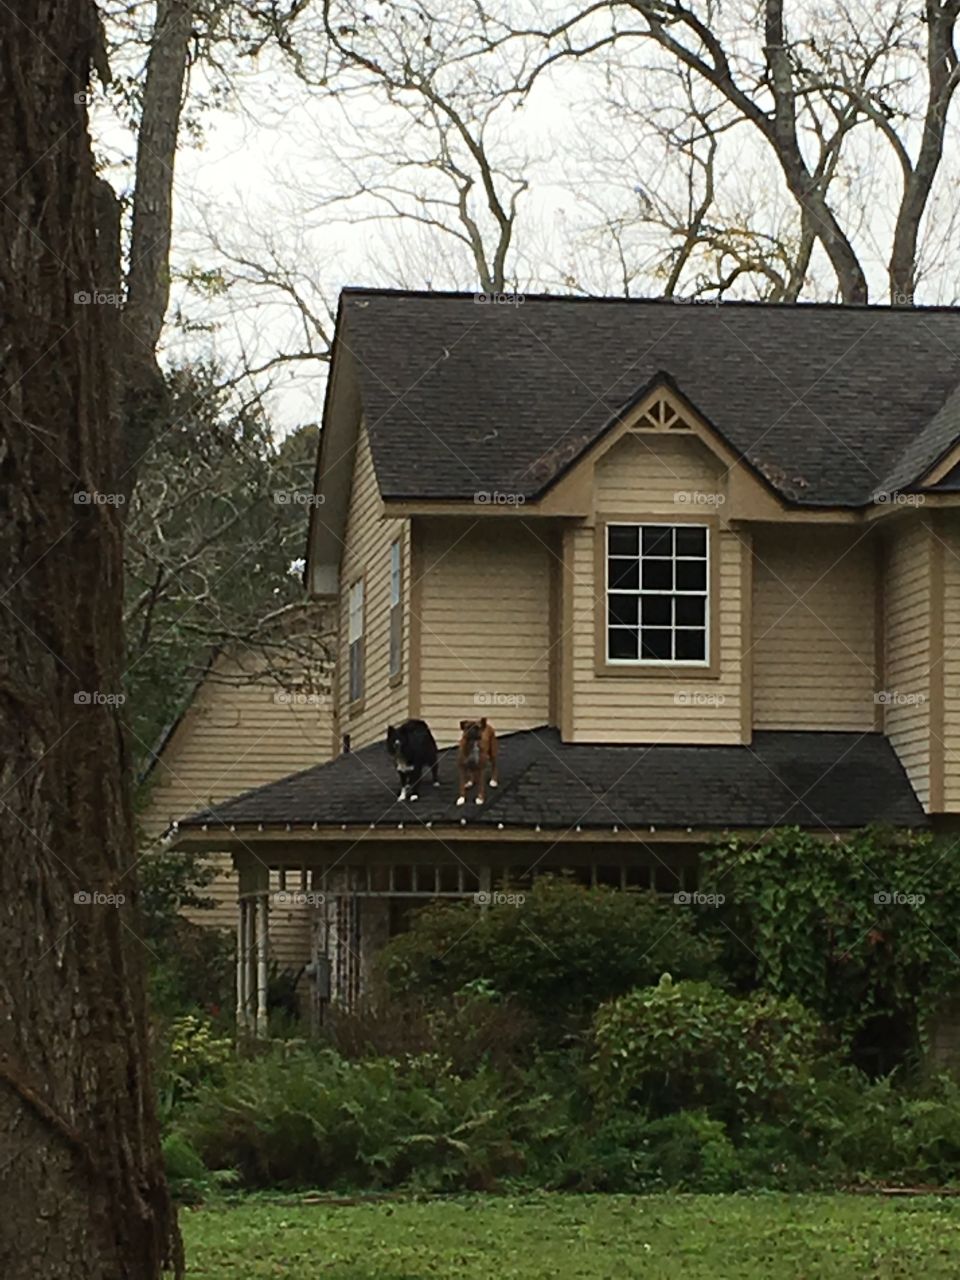 Dogs on roof?